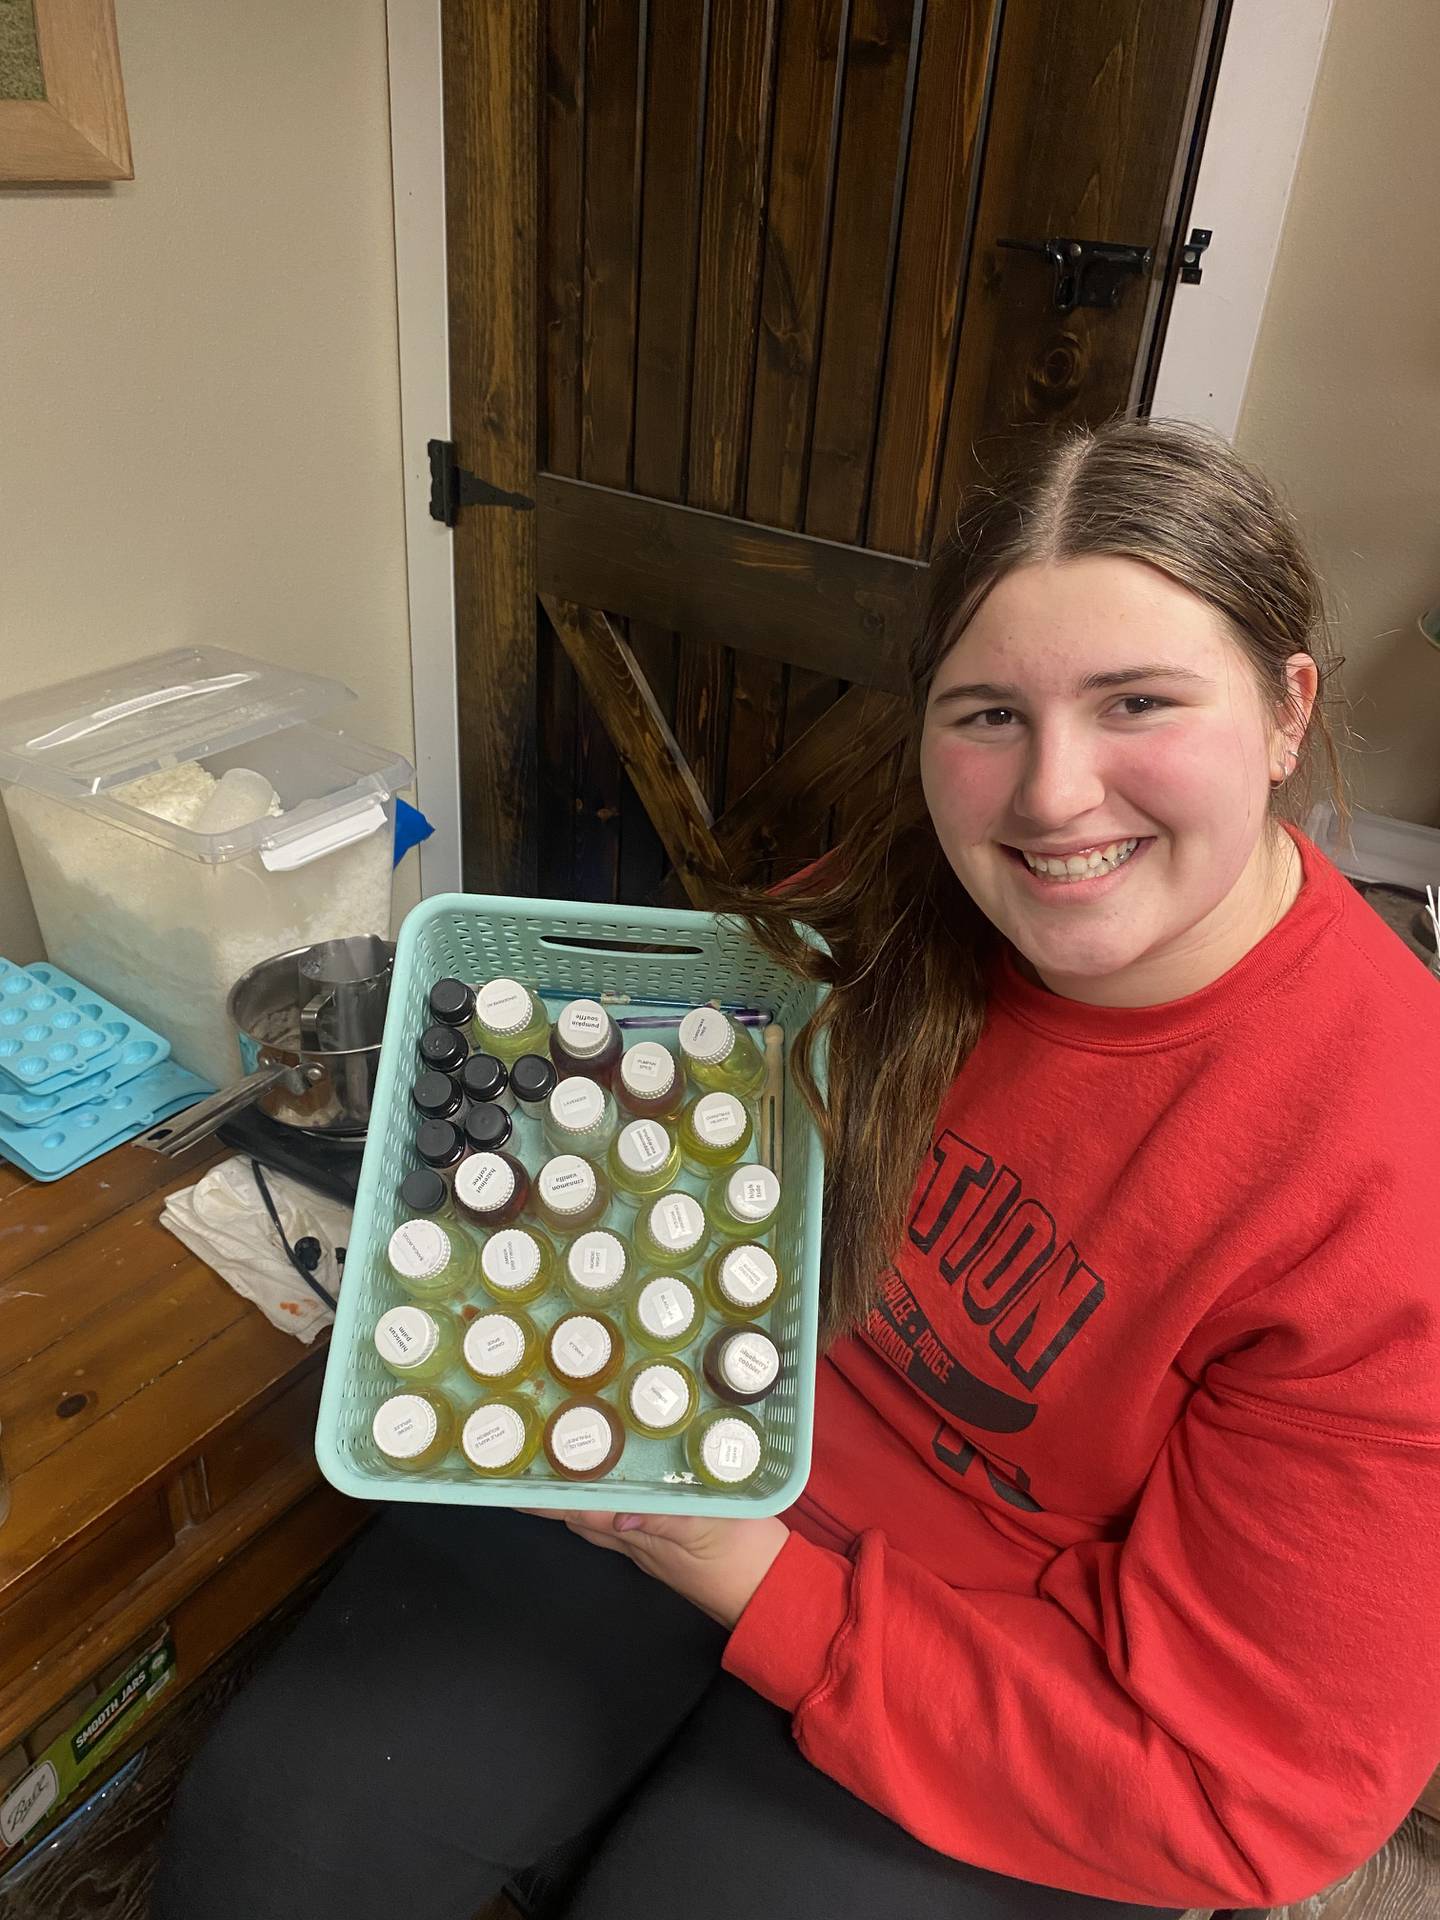 Sayde Hogg shows some of her soy wax candles that she makes along with car freshies for her Sayde’s Scents business.